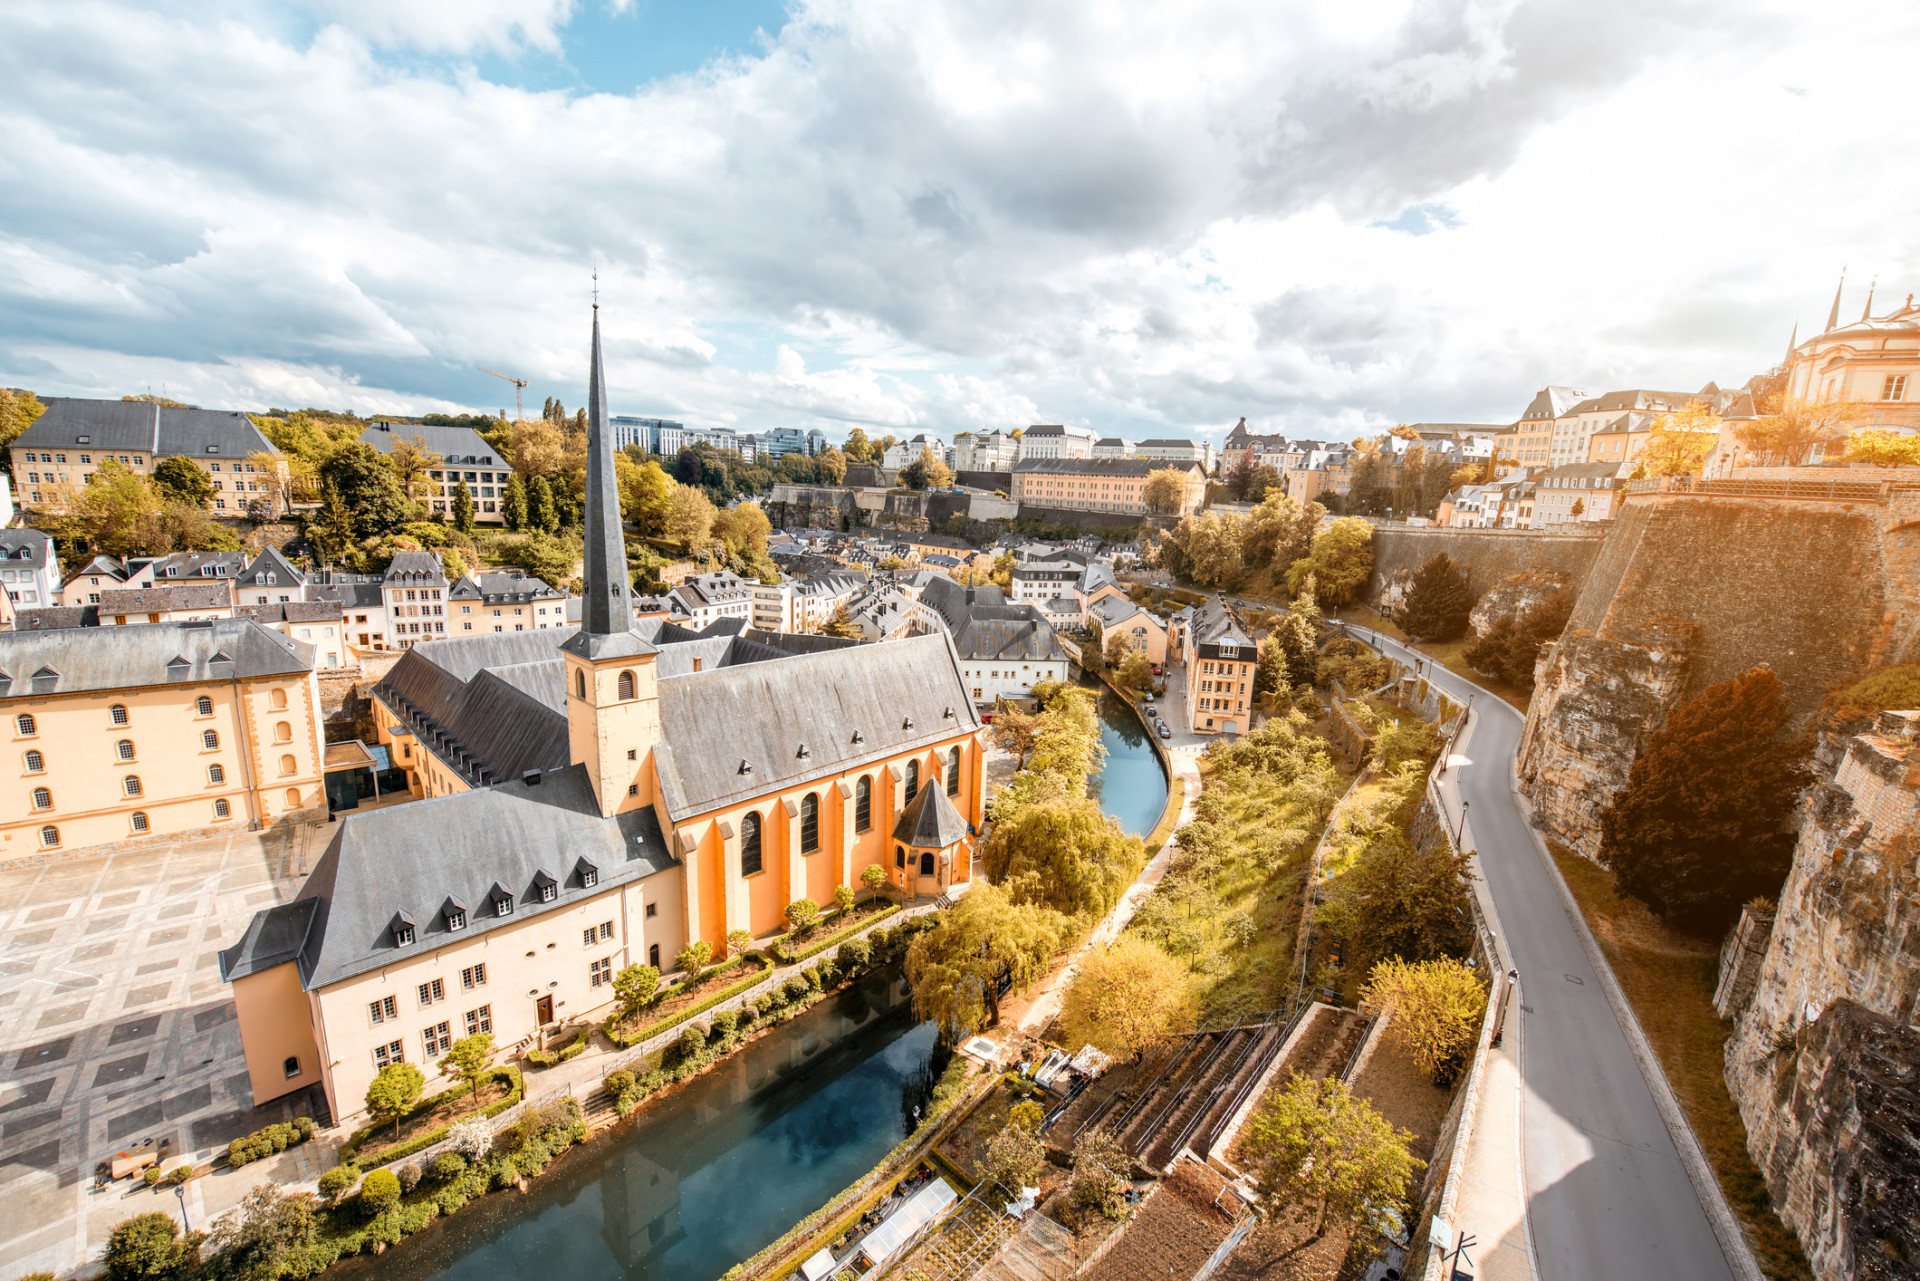 This small city in the small nation of Luxembourg has surprisingly got a lot to offer.